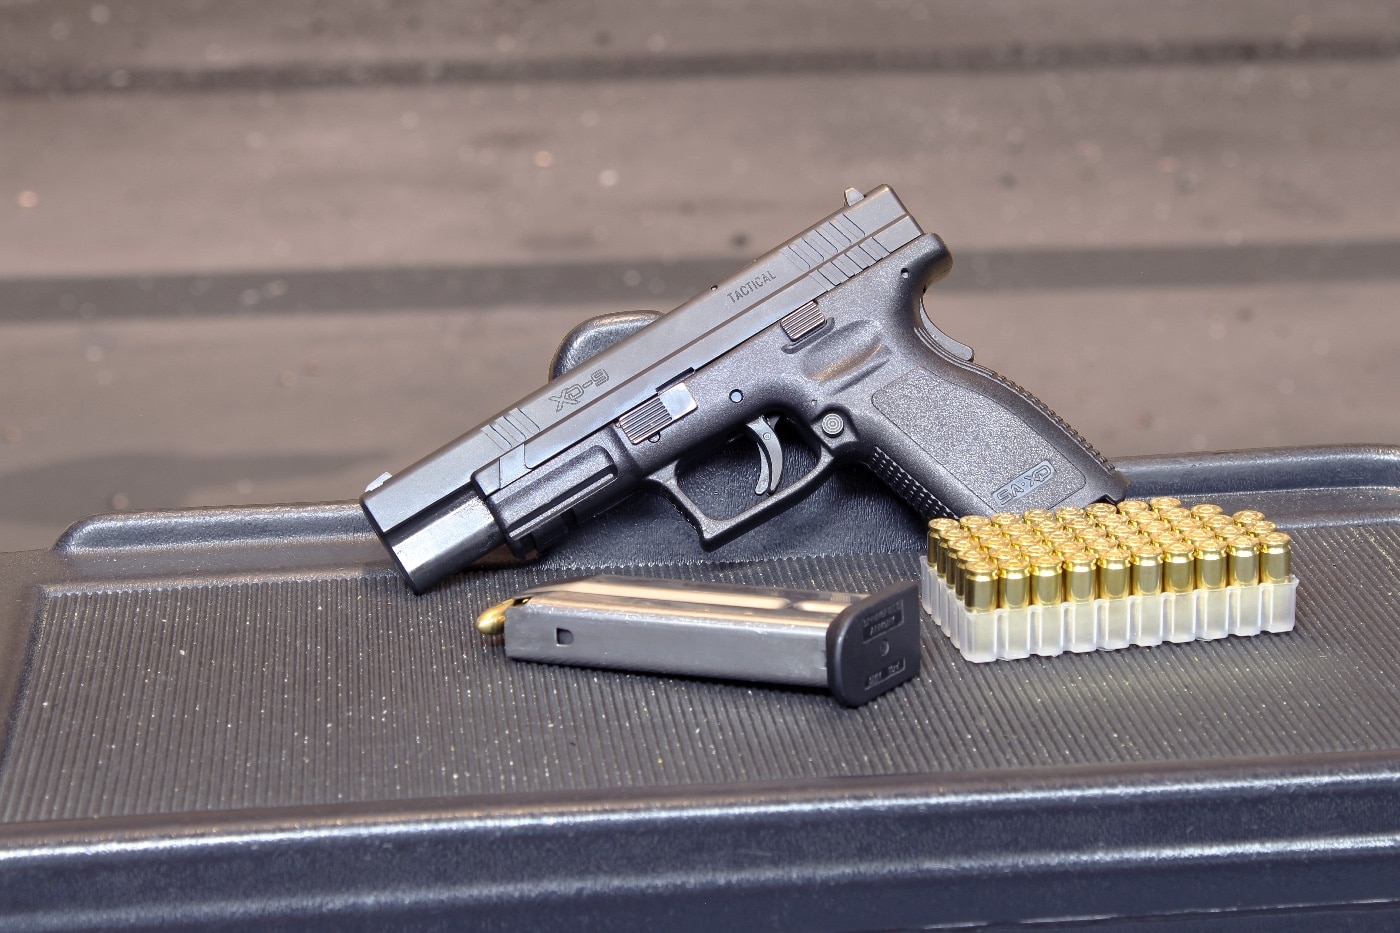 This image shows the Springfield Armory XD Tactical at the range with a loaded magazine and an ammunition box with 50 rounds of live handgun cartridges.